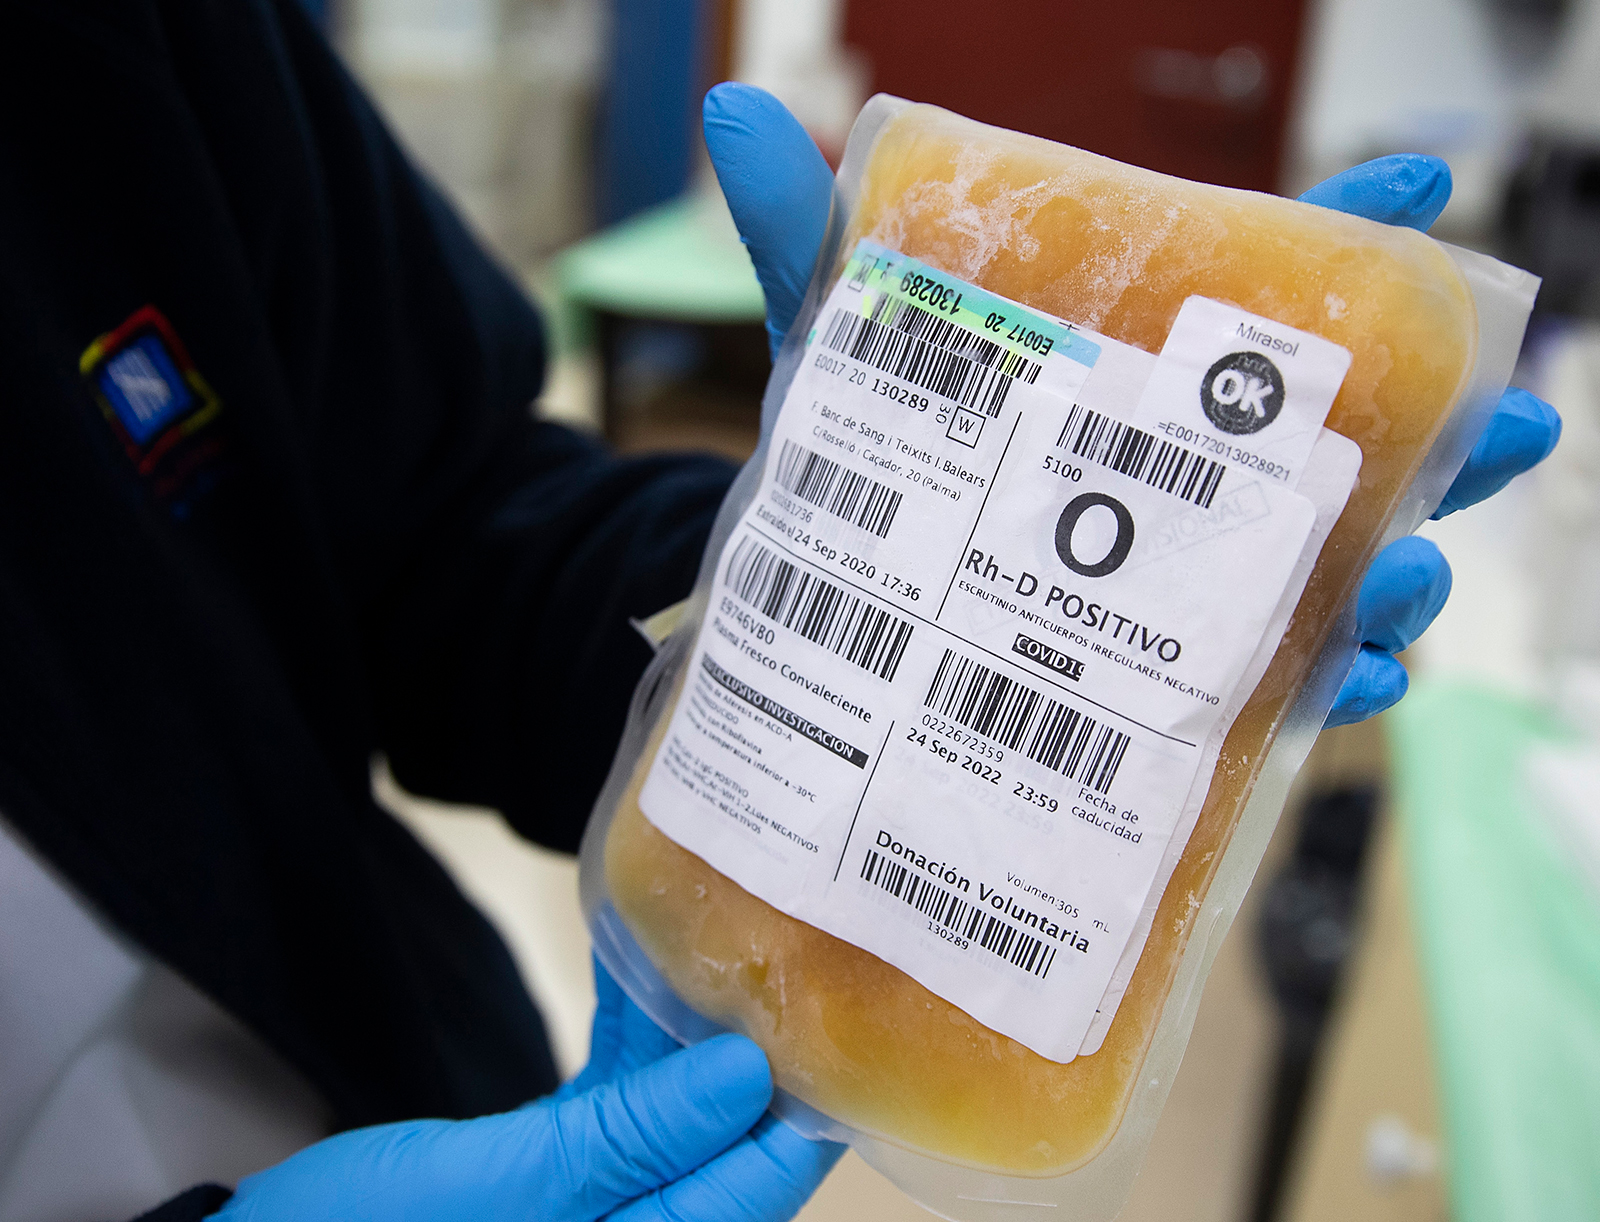 A laboratory technician shows a bag of frozen blood plasma from a donor who has recovered from Covid-19 at The Blood and Tissue Bank Foundation in Palma de Mallorca, Spain, on October 5.